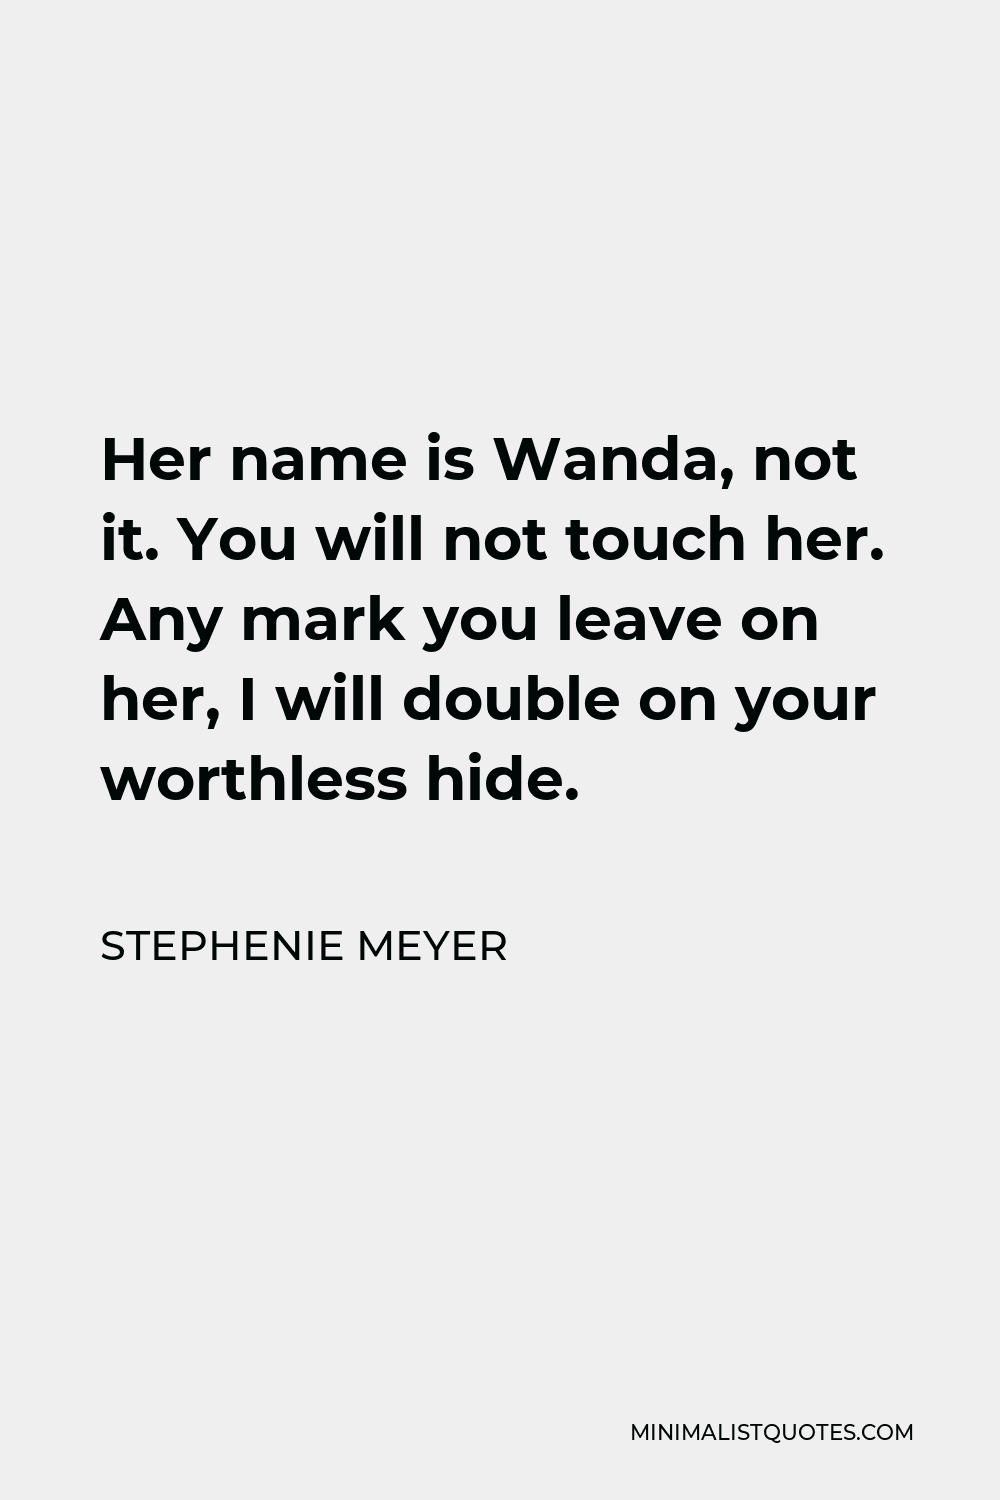 Stephenie Meyer Quote - Her name is Wanda, not it. You will not touch her. Any mark you leave on her, I will double on your worthless hide.